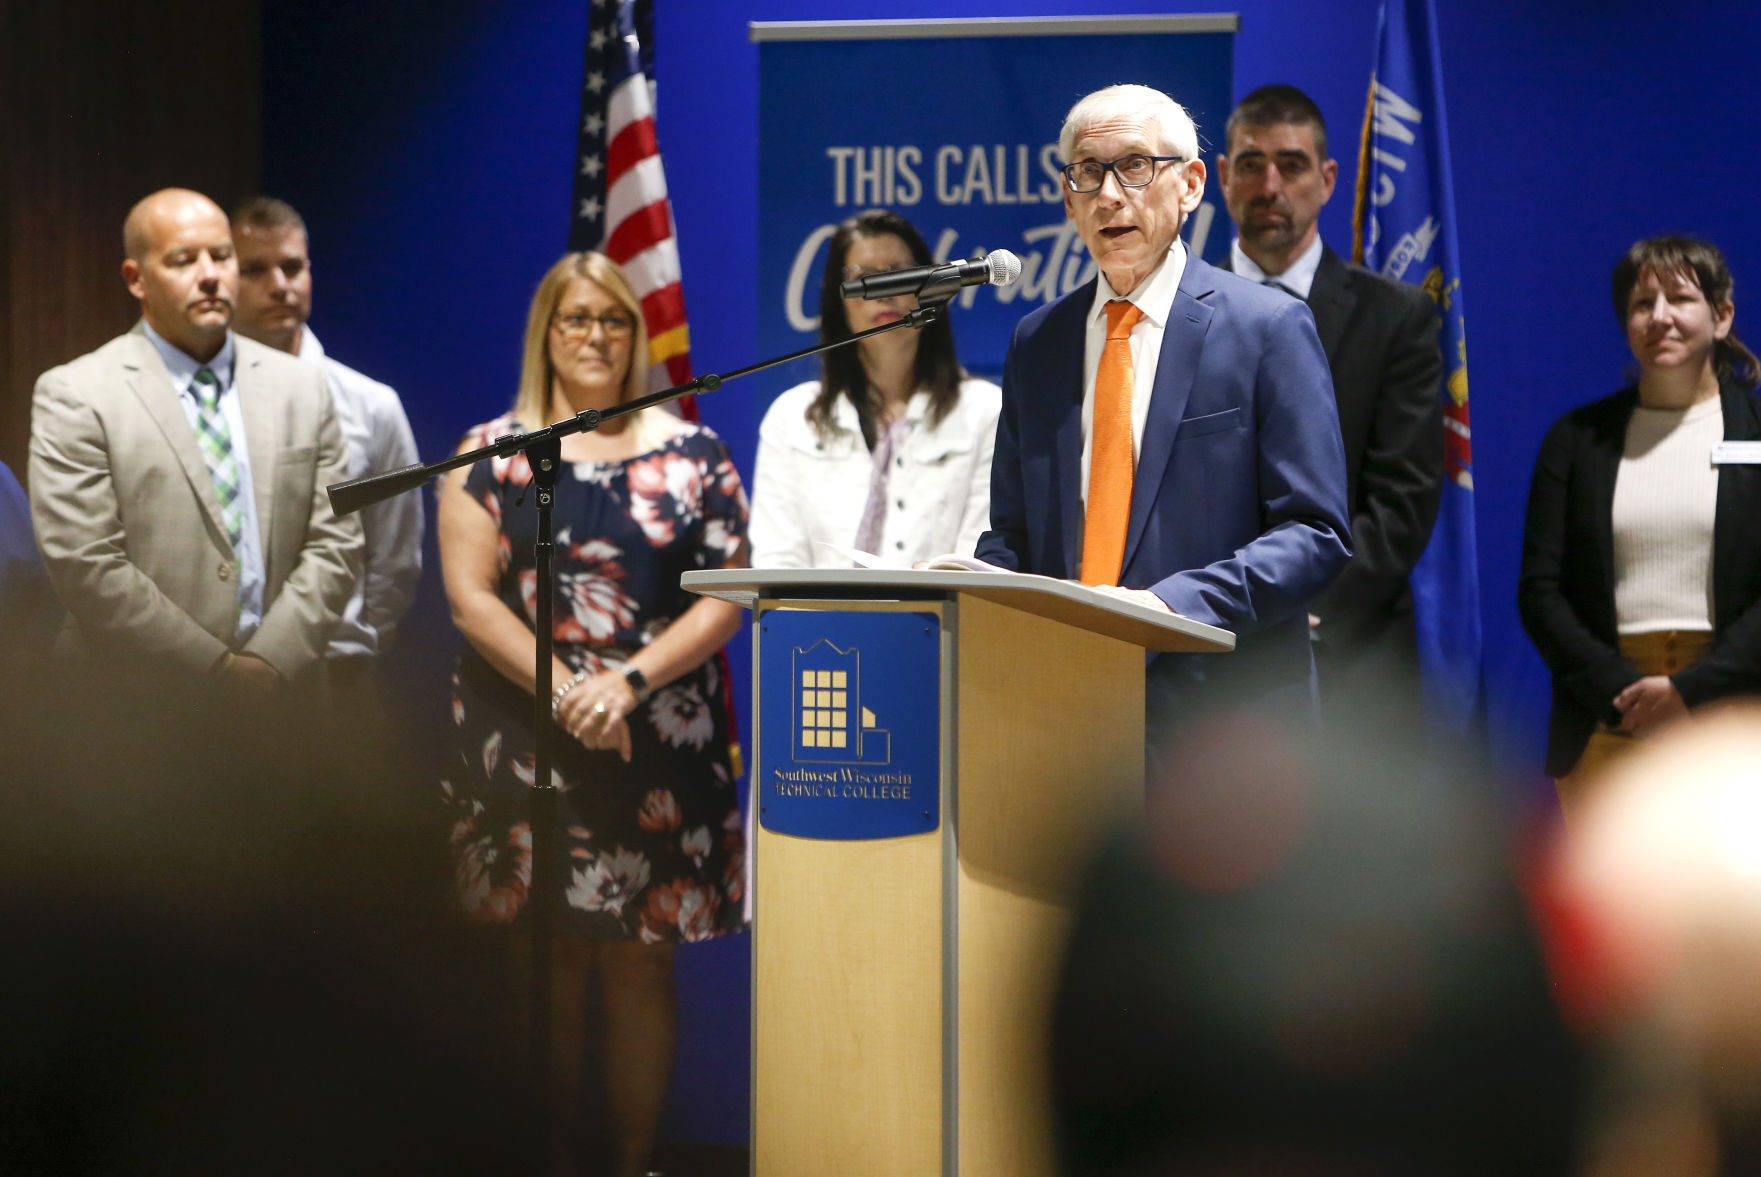 Wisconsin Gov. Tony Evers announces $2.9 million in grant funding for workforce development efforts at Southwest Wisconsin Technical College in Fennimore, Wis., on Thursday.    PHOTO CREDIT: Dave Kettering